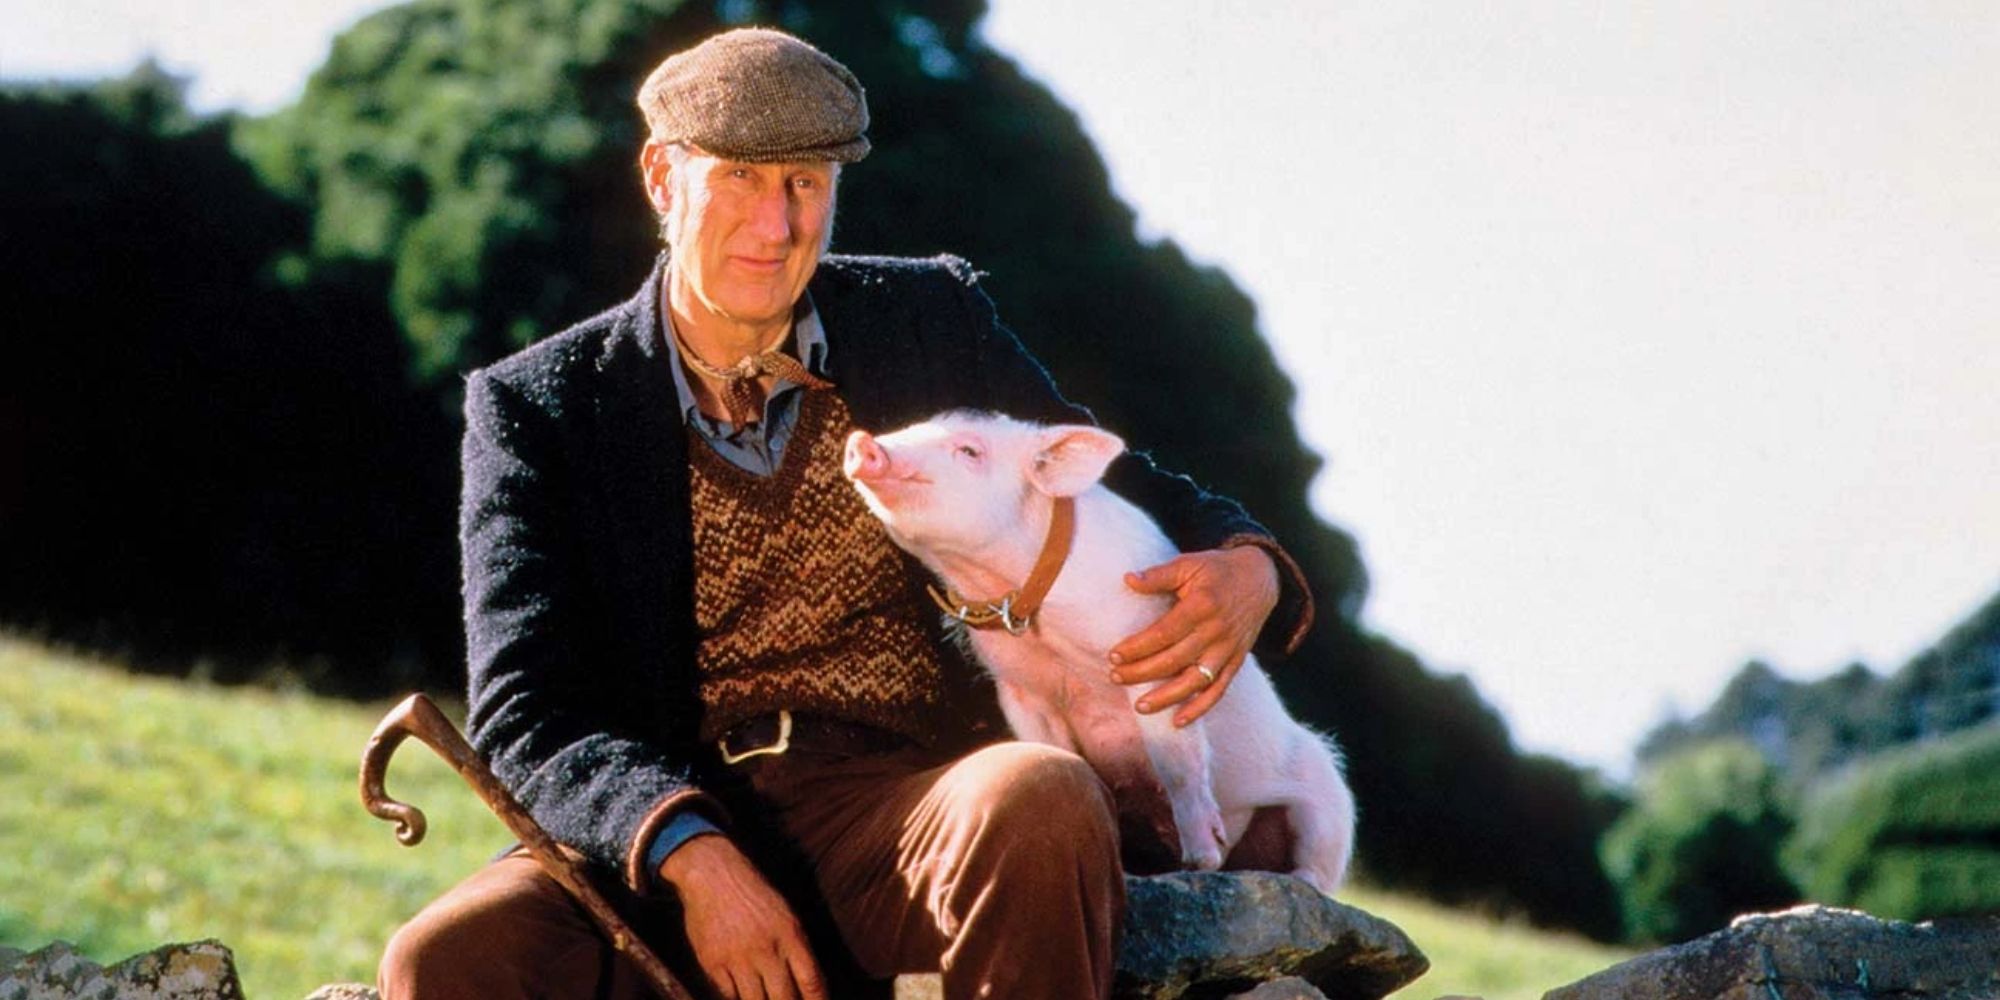 James Cromwell as Arthur Hoggett, holding Babe the pig close in Babe